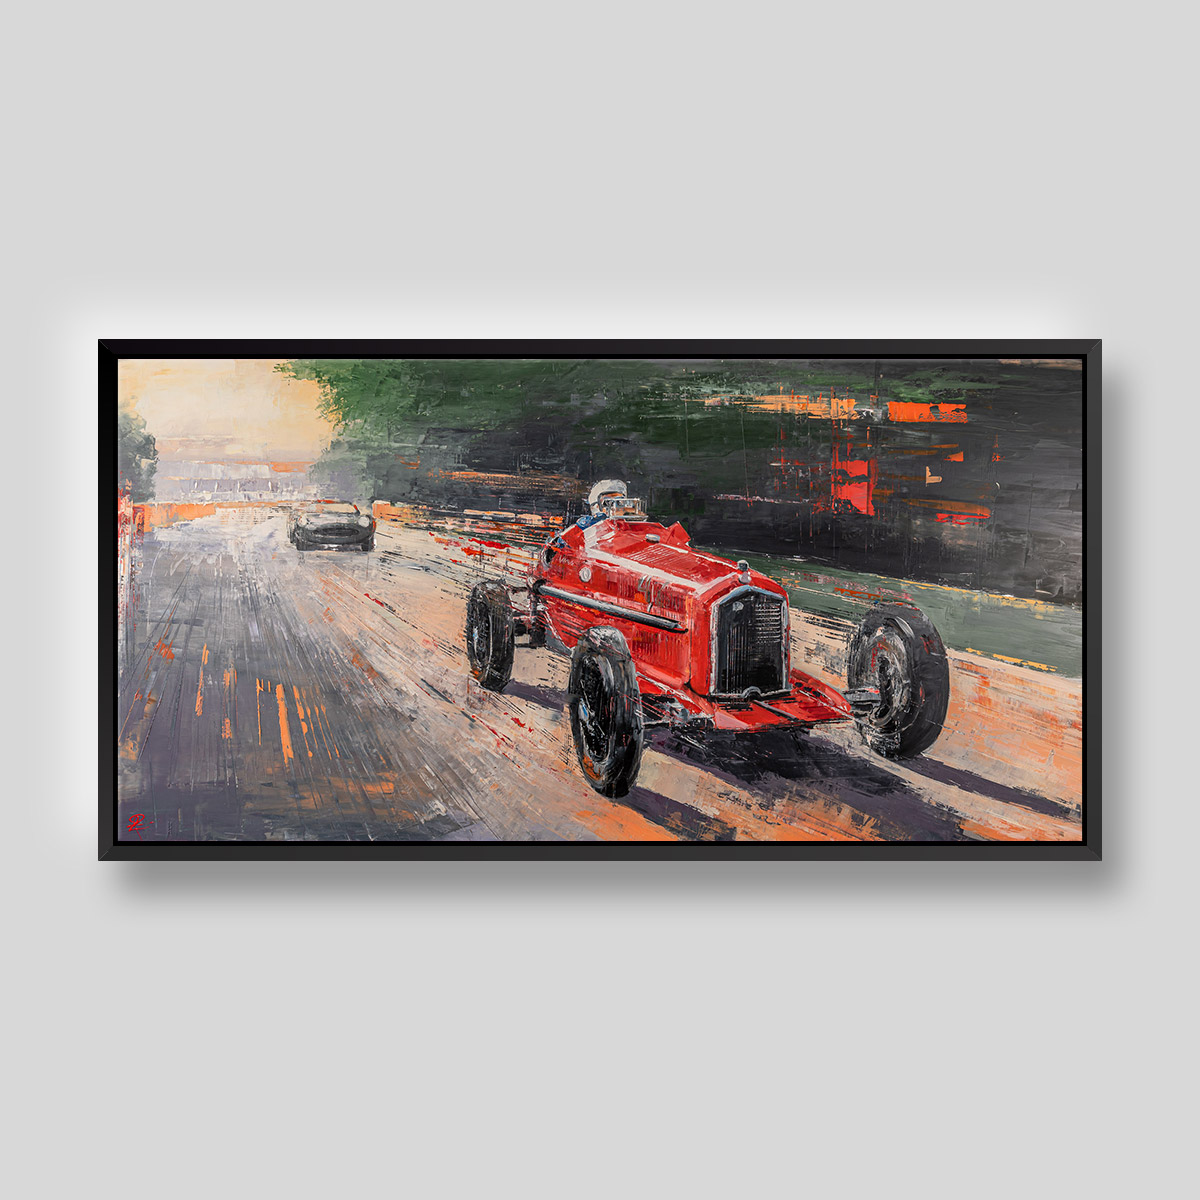 Racing Revival by Paul Kenton, UK Contemporary artist, an original painting from his Motorsports collection